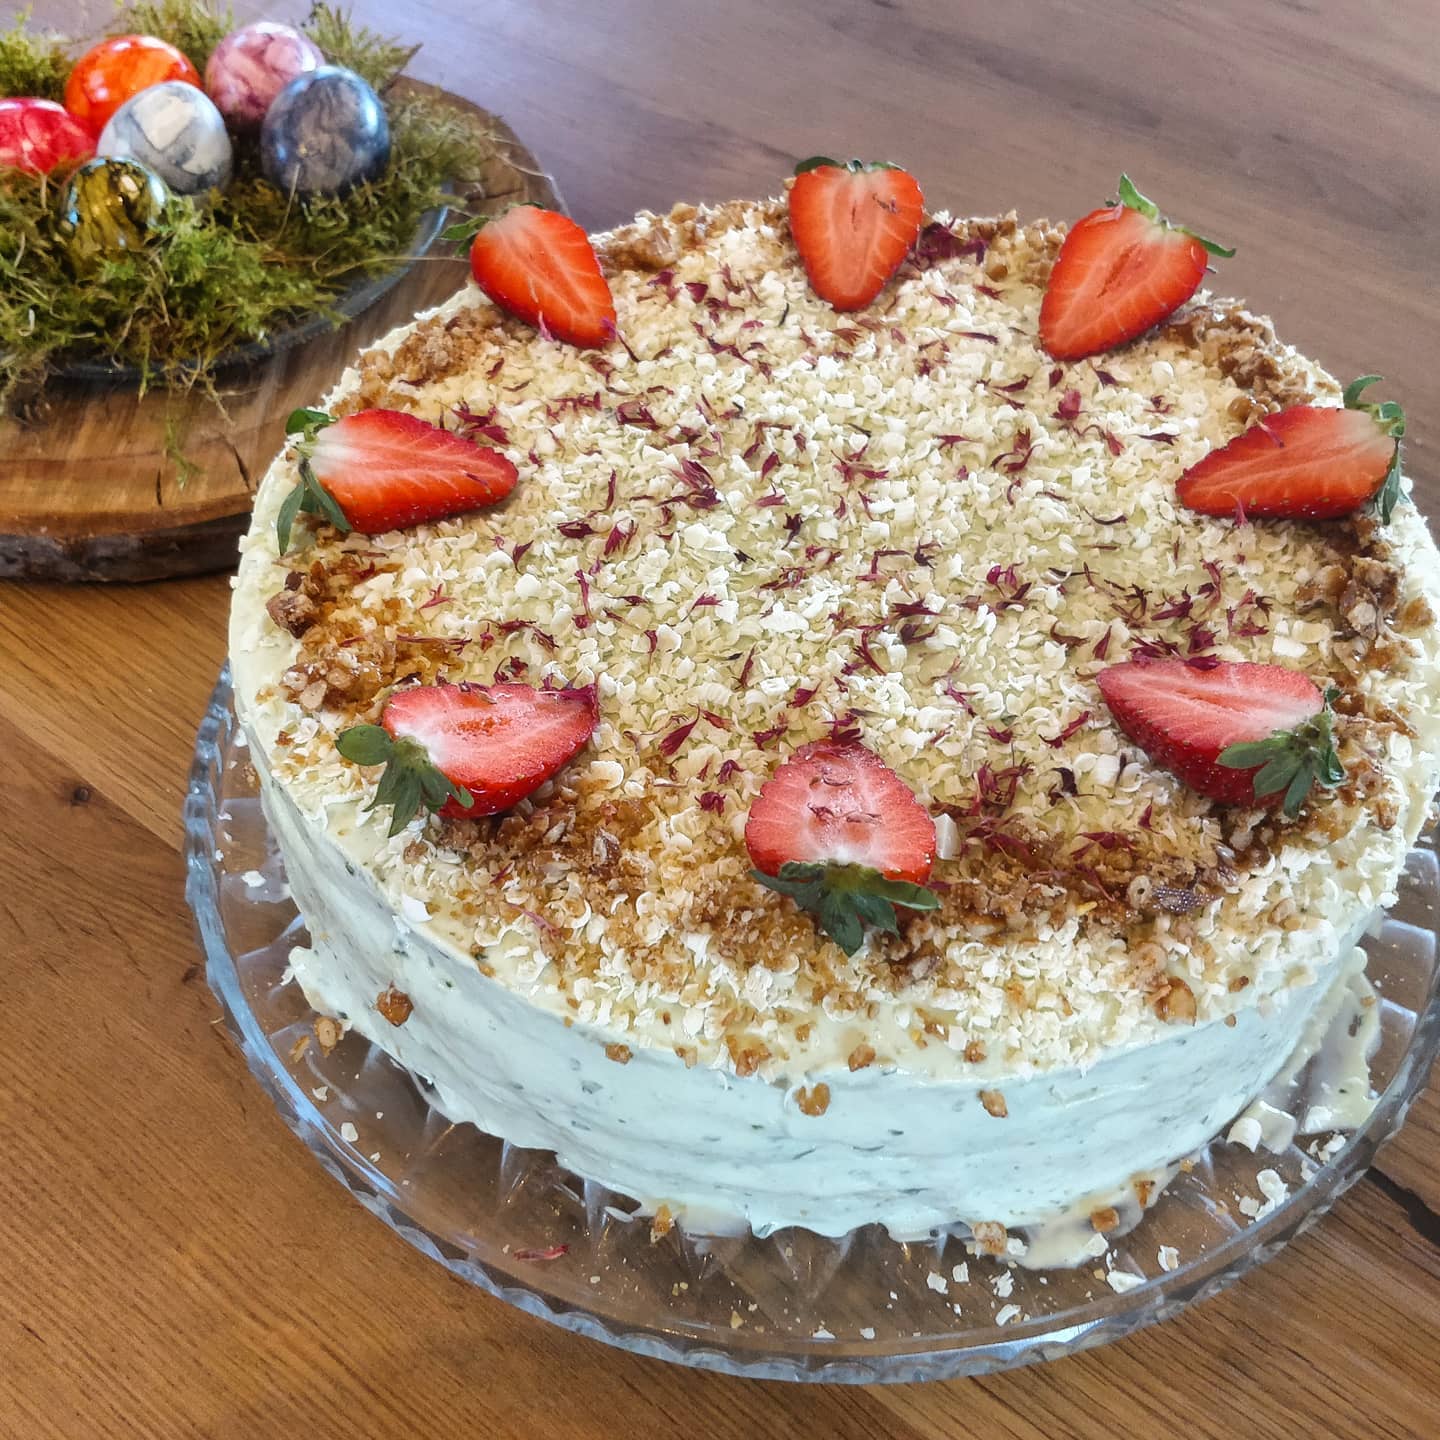 Birthday cake for my mother - we left half of it at her doorstep to celebrate at least a little bit together.

Basil-cream-cheese frosting, vanilla biscuit with hugo and obviously variants from strawberries - creative baking together with @nord_binchen